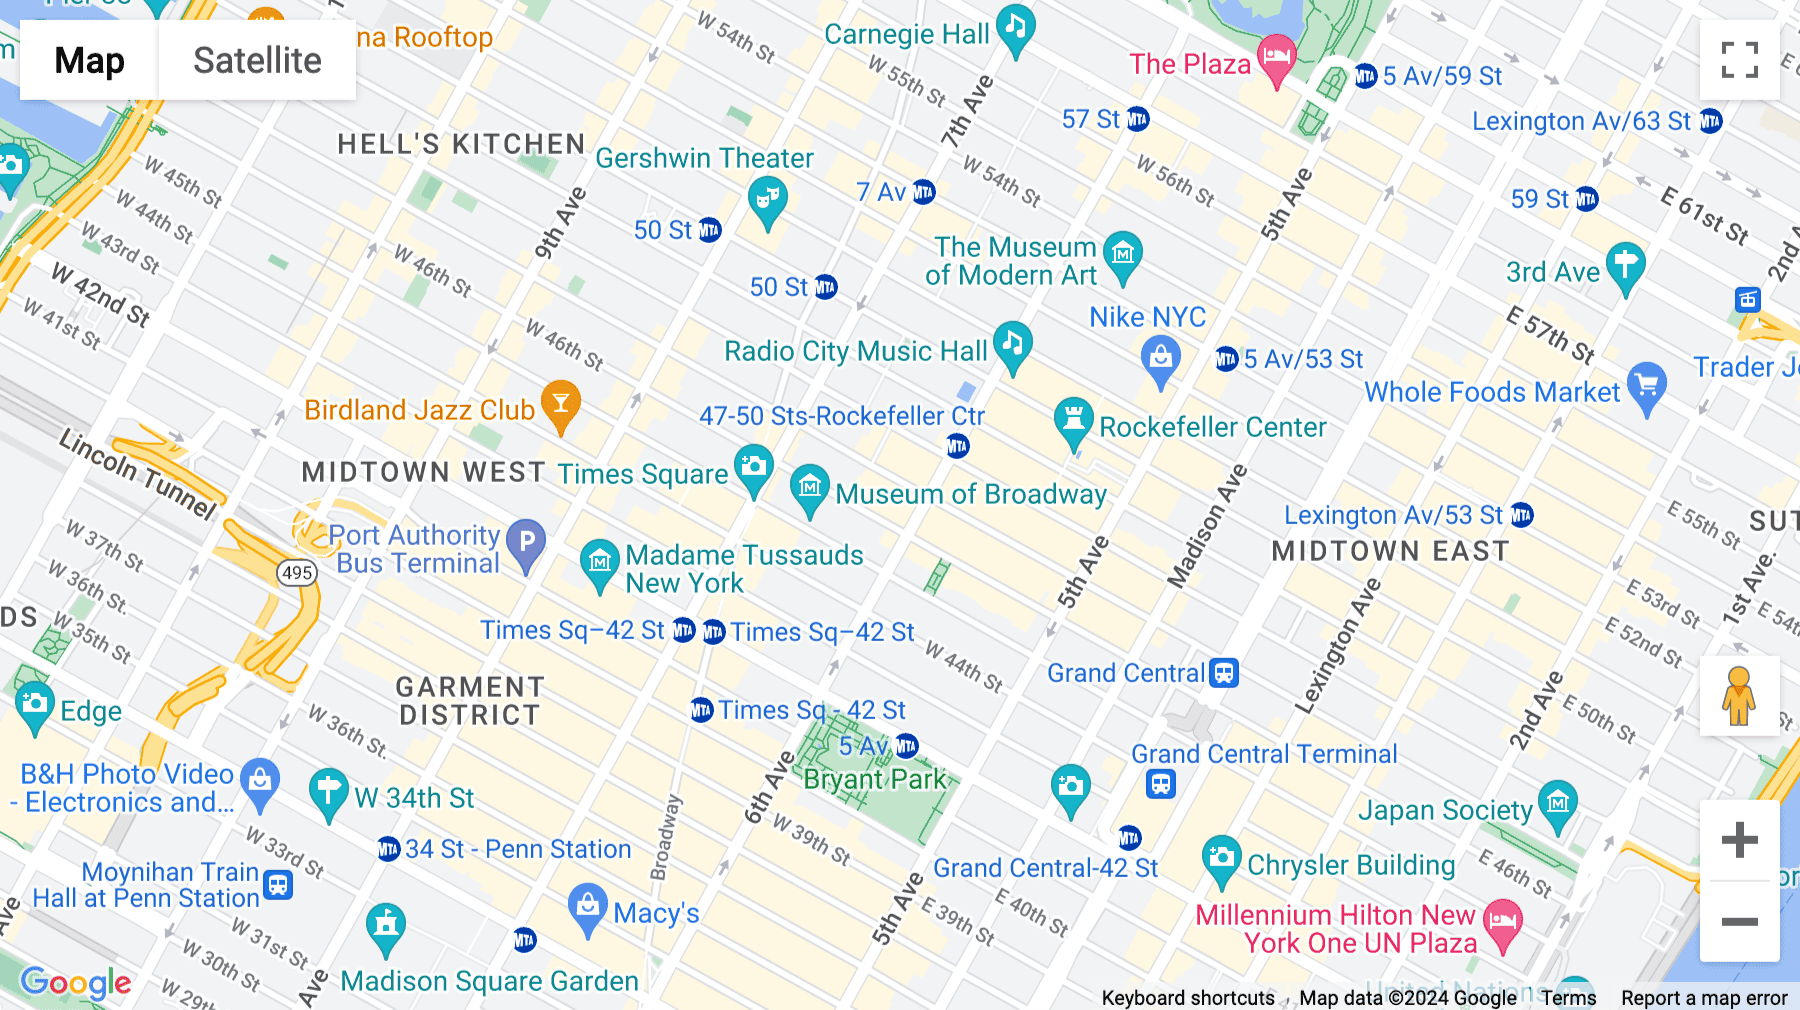 Click for interative map of 1185 Avenue of the Americas, New York City